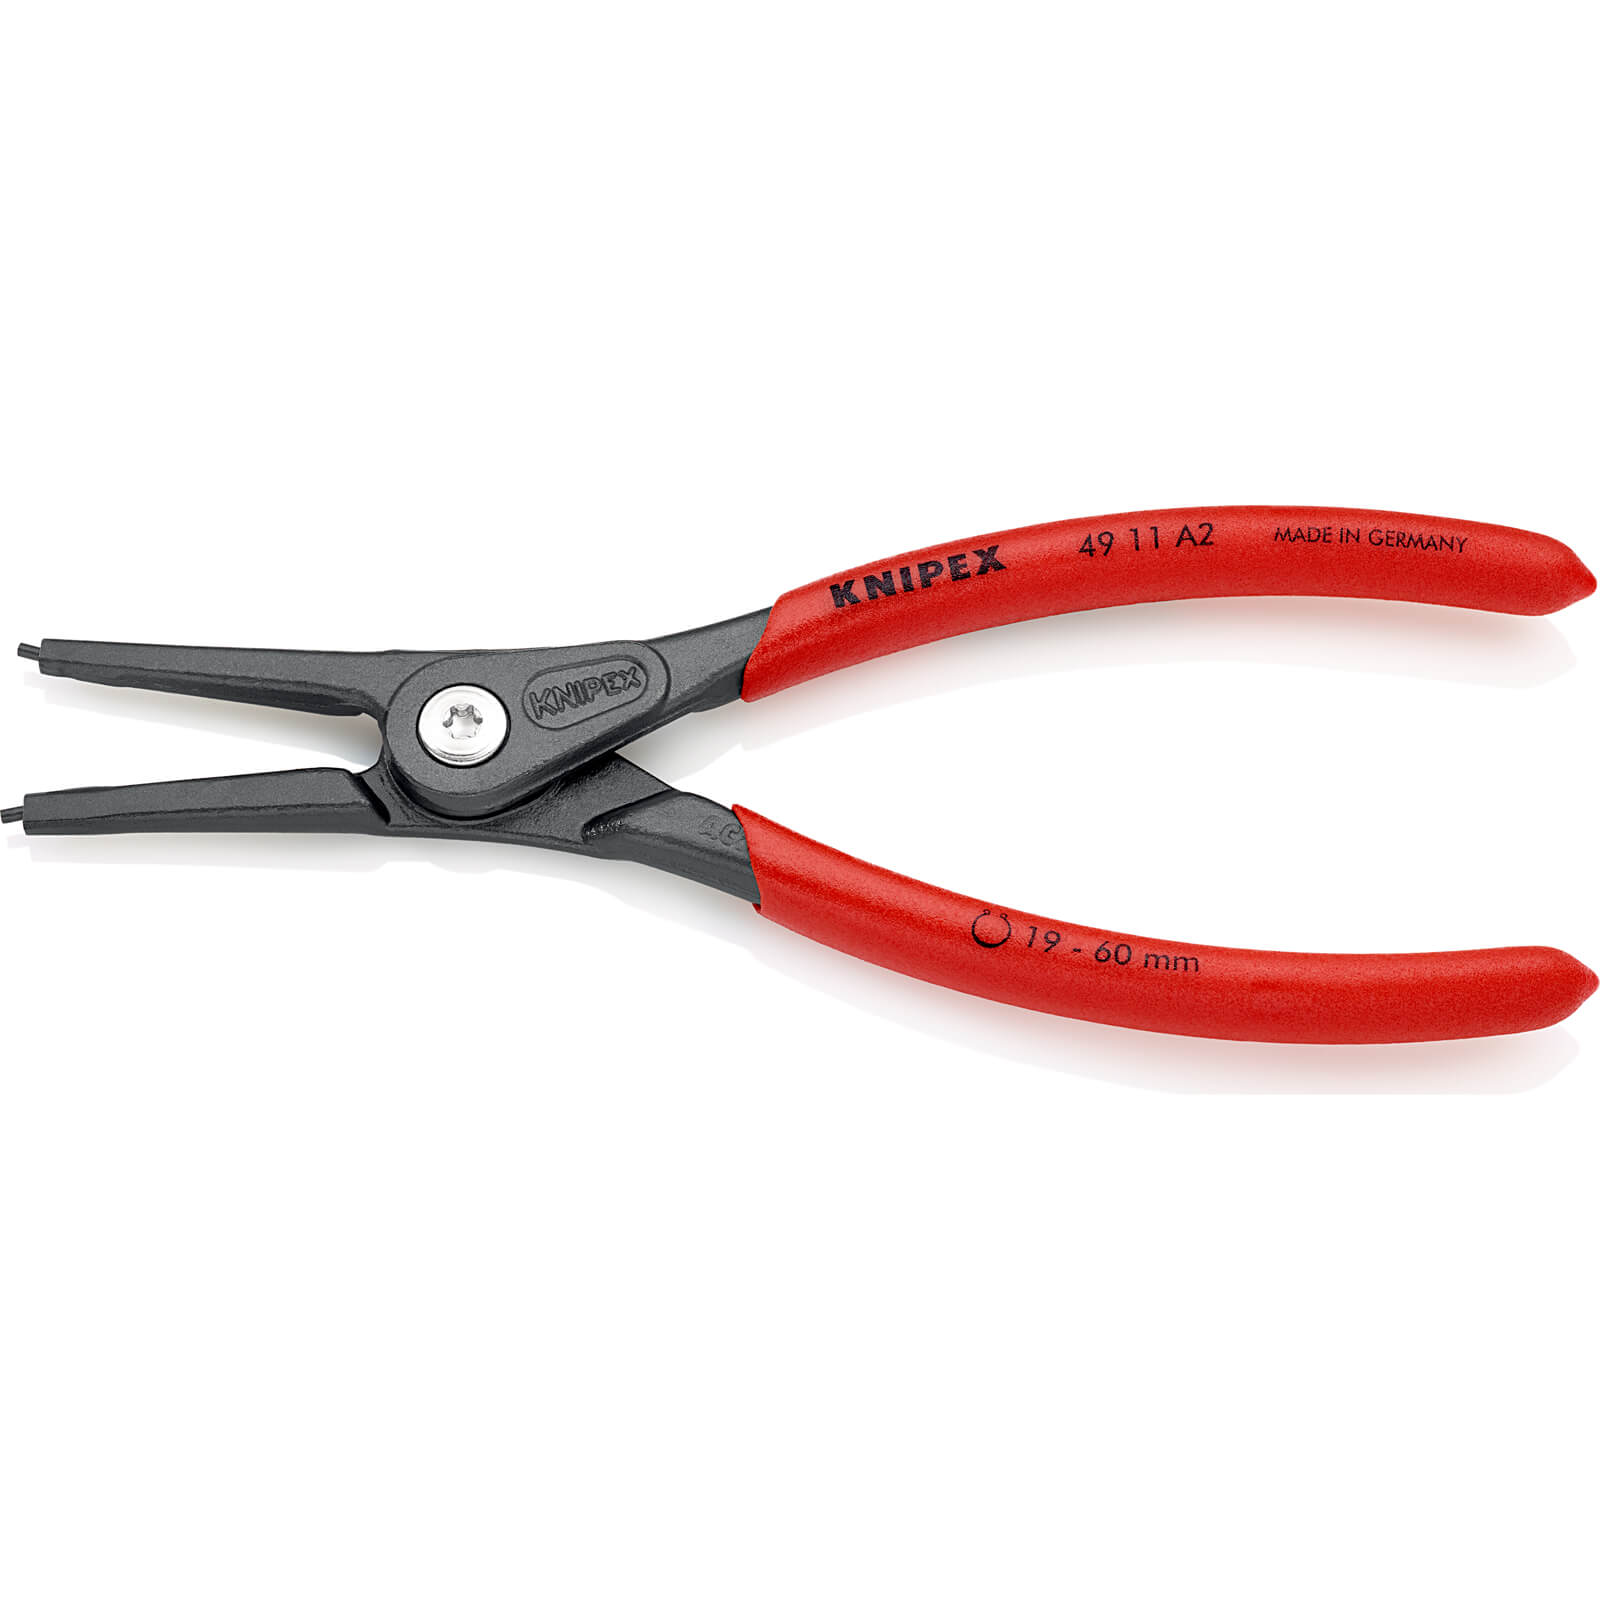 Image of Knipex 49 11 External Straight Precision Circlip Pliers 19mm - 60mm